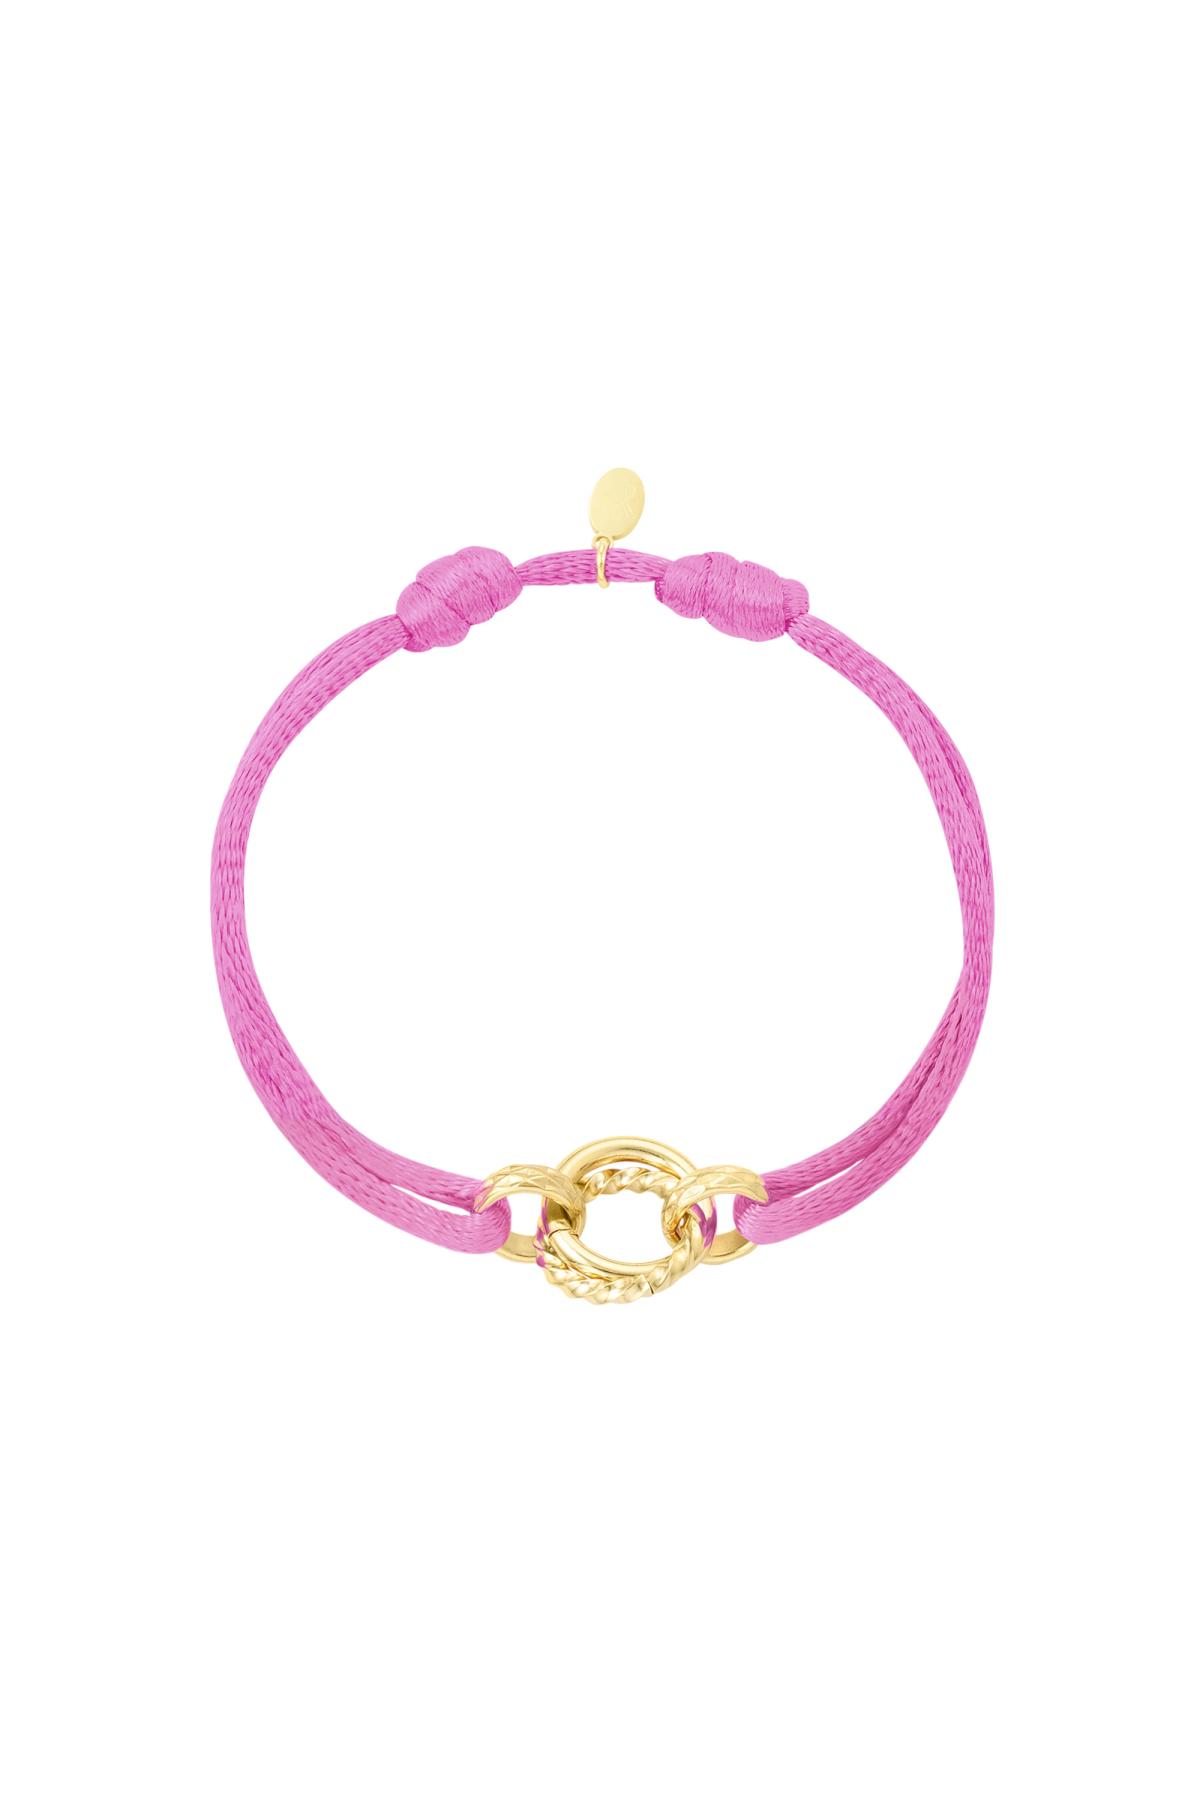 Pink & Gold Afbeelding12